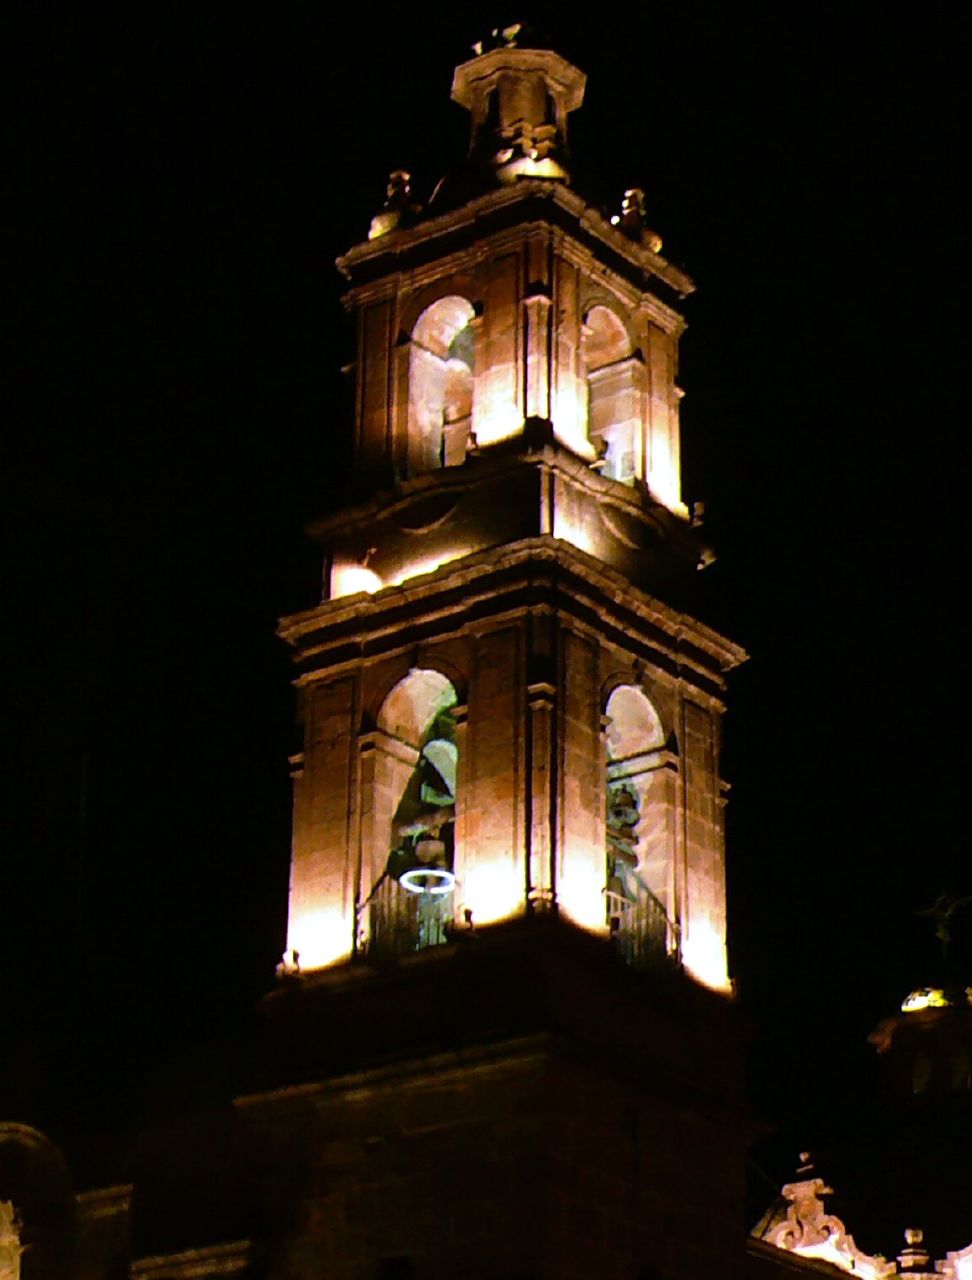 a tall tower is lit up at night